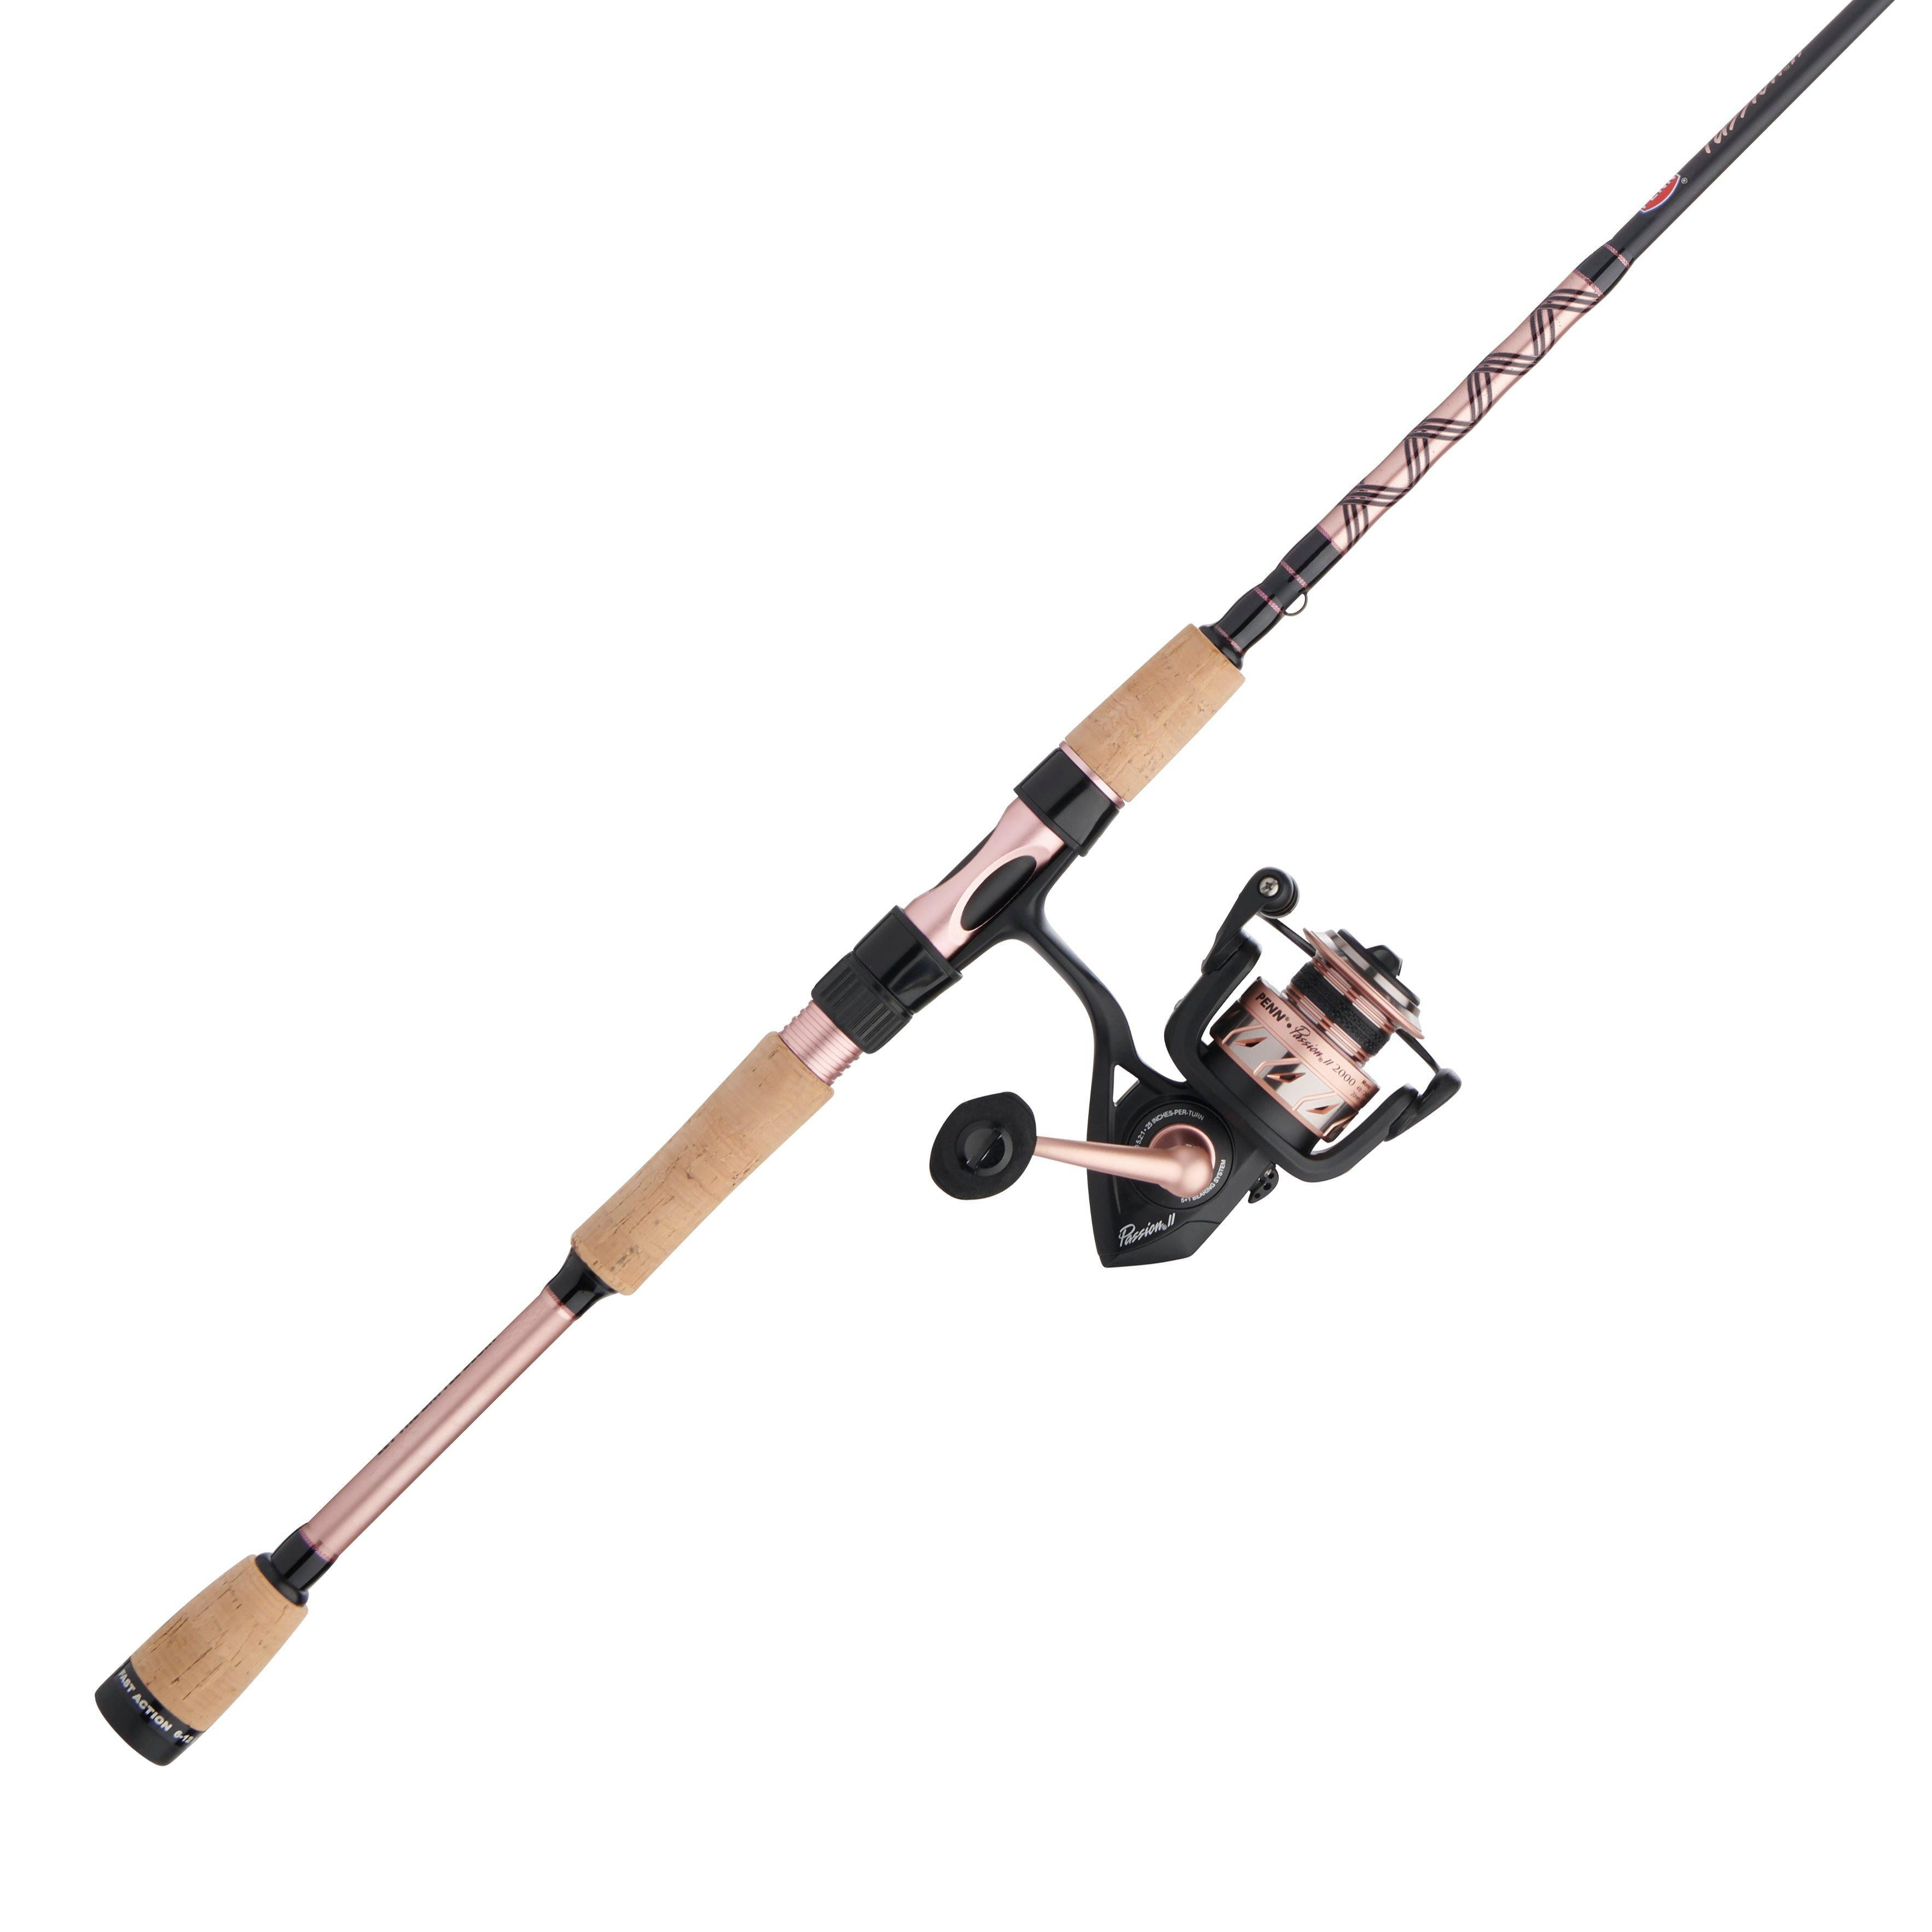 Penn Battle 2 8ft Rod 5000 Spinning Reel Fishing Combo for Sale in Tustin,  CA - OfferUp